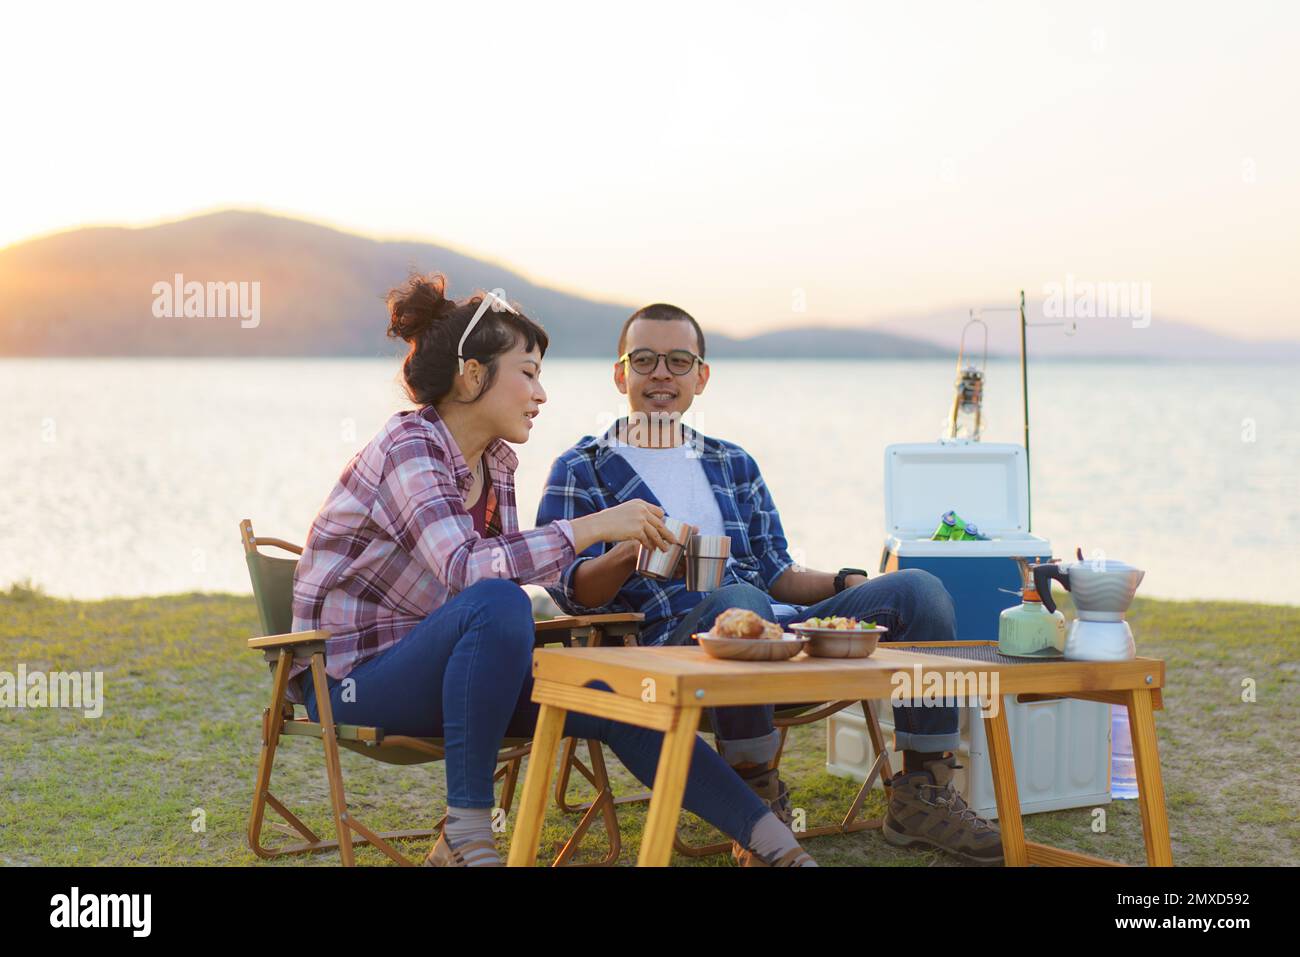 Asian couple having a cup of coffee or water at their camping site with lake in the background during sunset Stock Photo